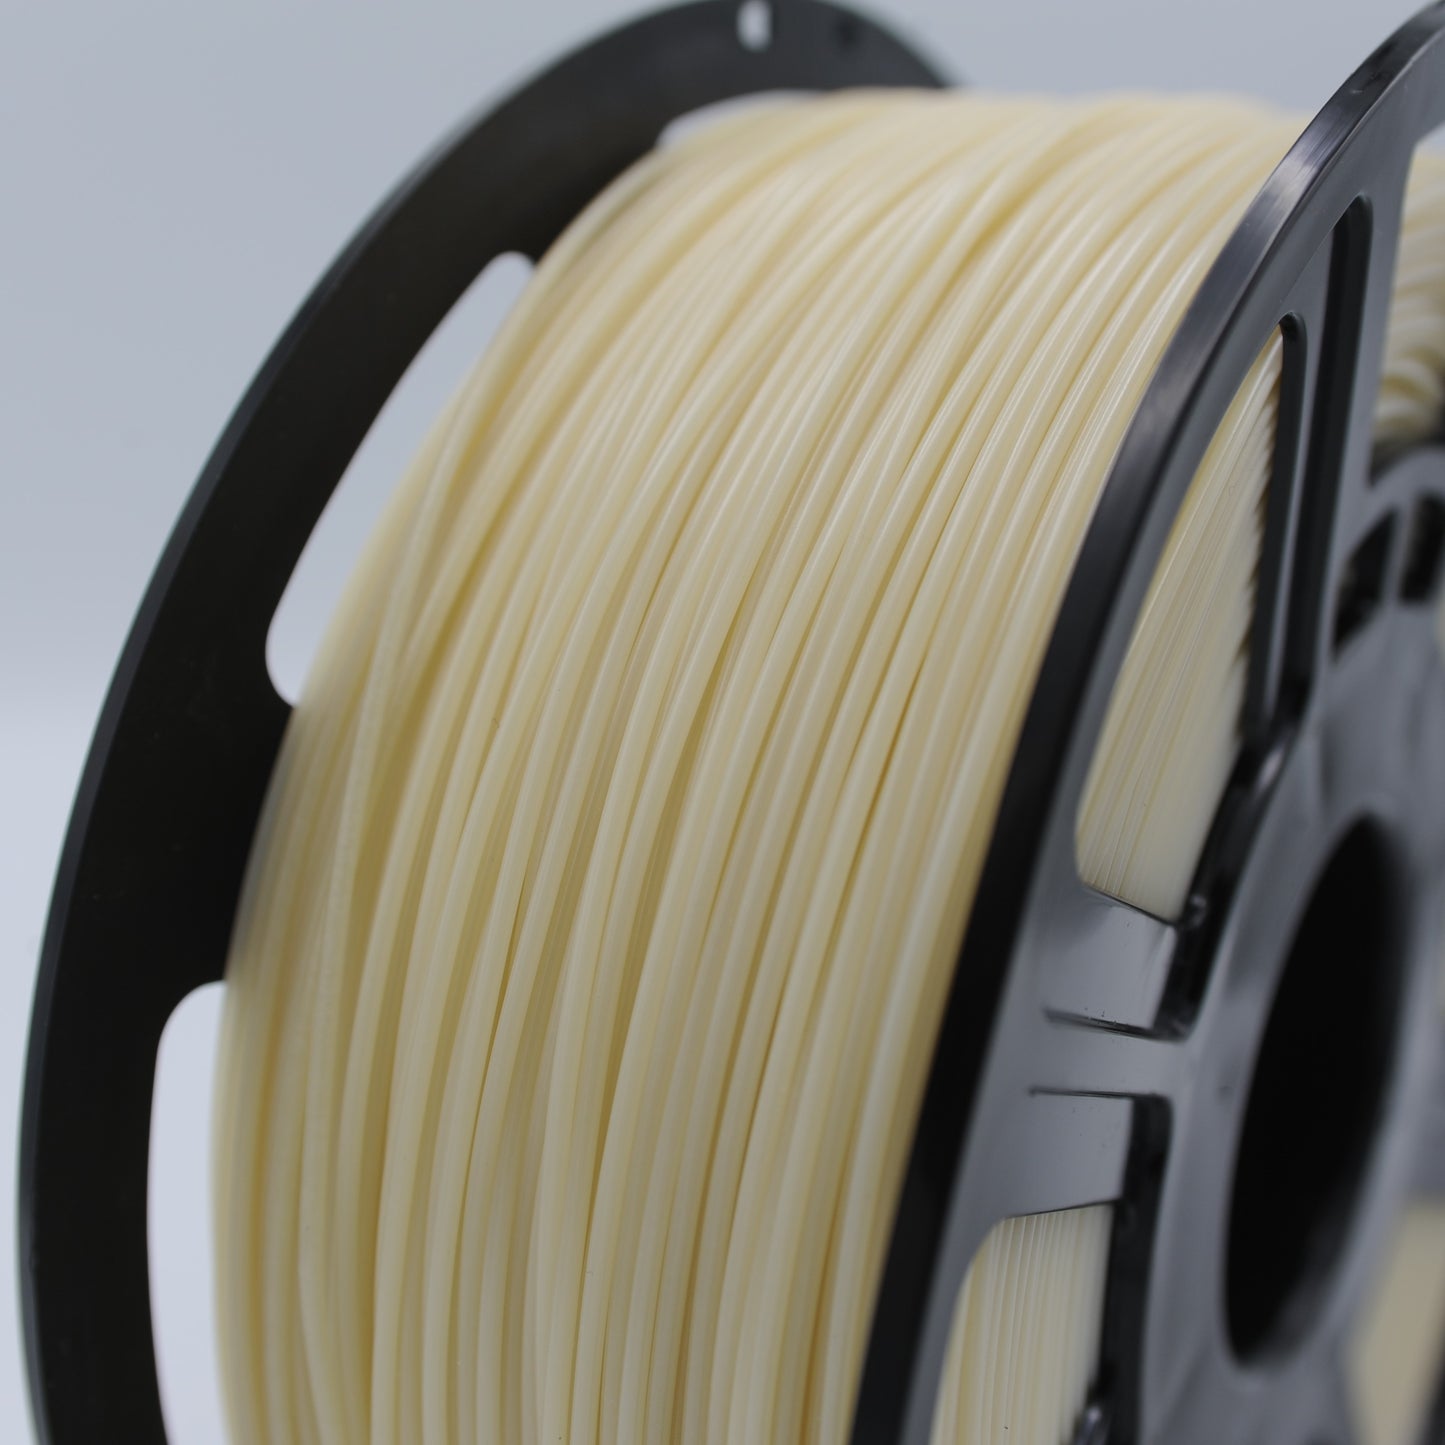 LayerWorks PCABS Filament 1.75mm